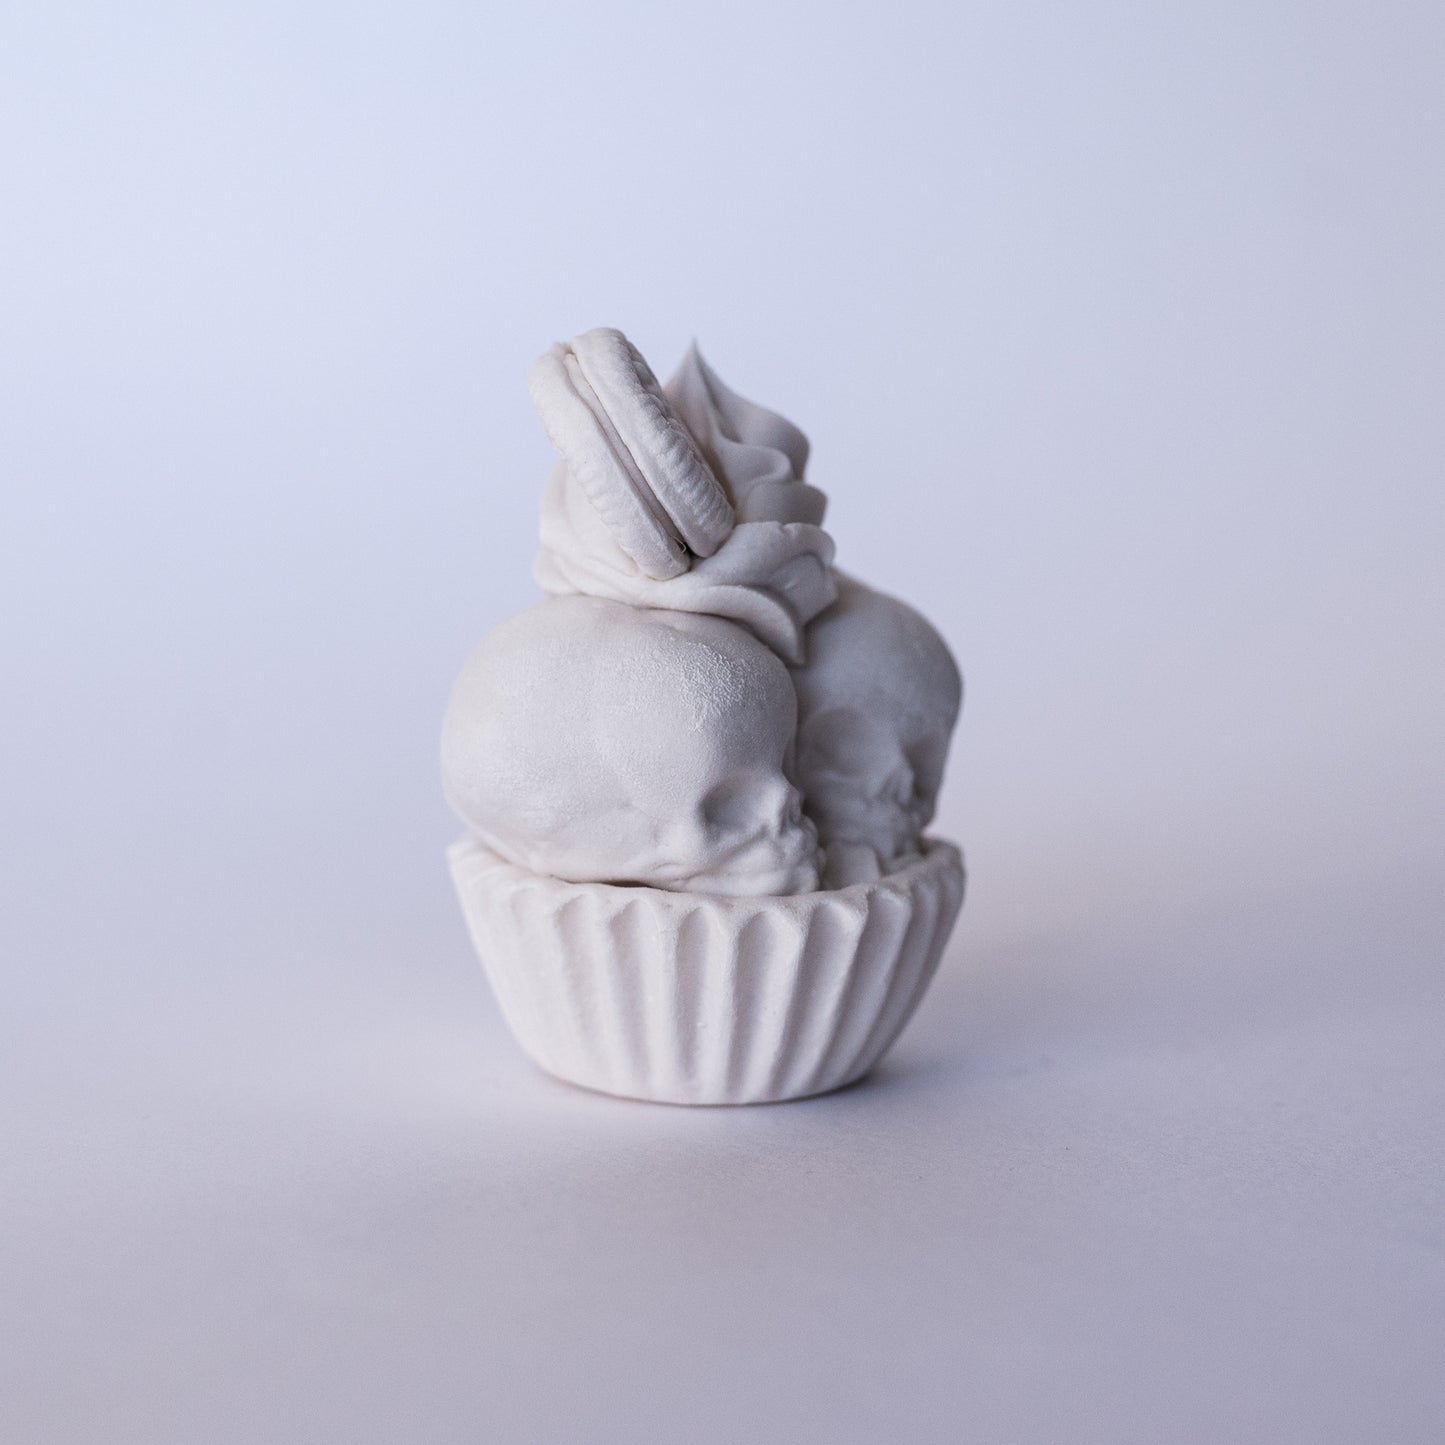 Twin Cupcake with Cookie (Limited Edition Porcelain Sculpture)